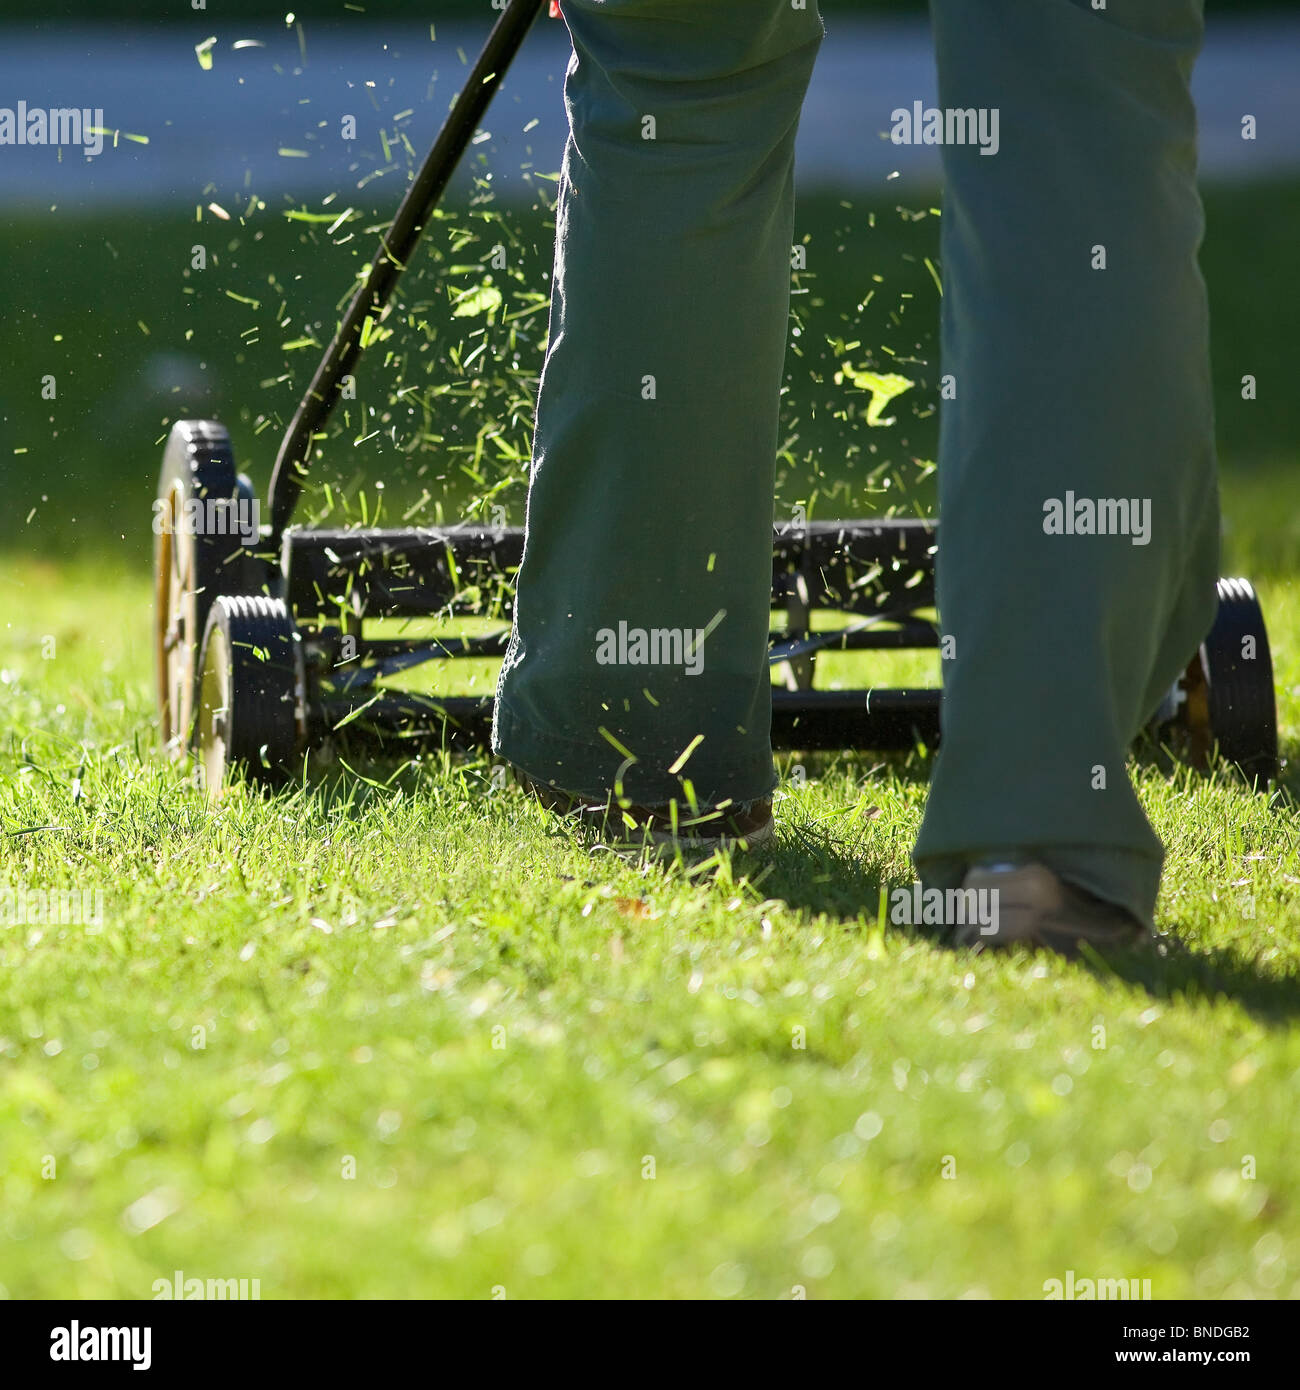 Cutting grass with an environmentally friendly lawn mower. Stock Photo